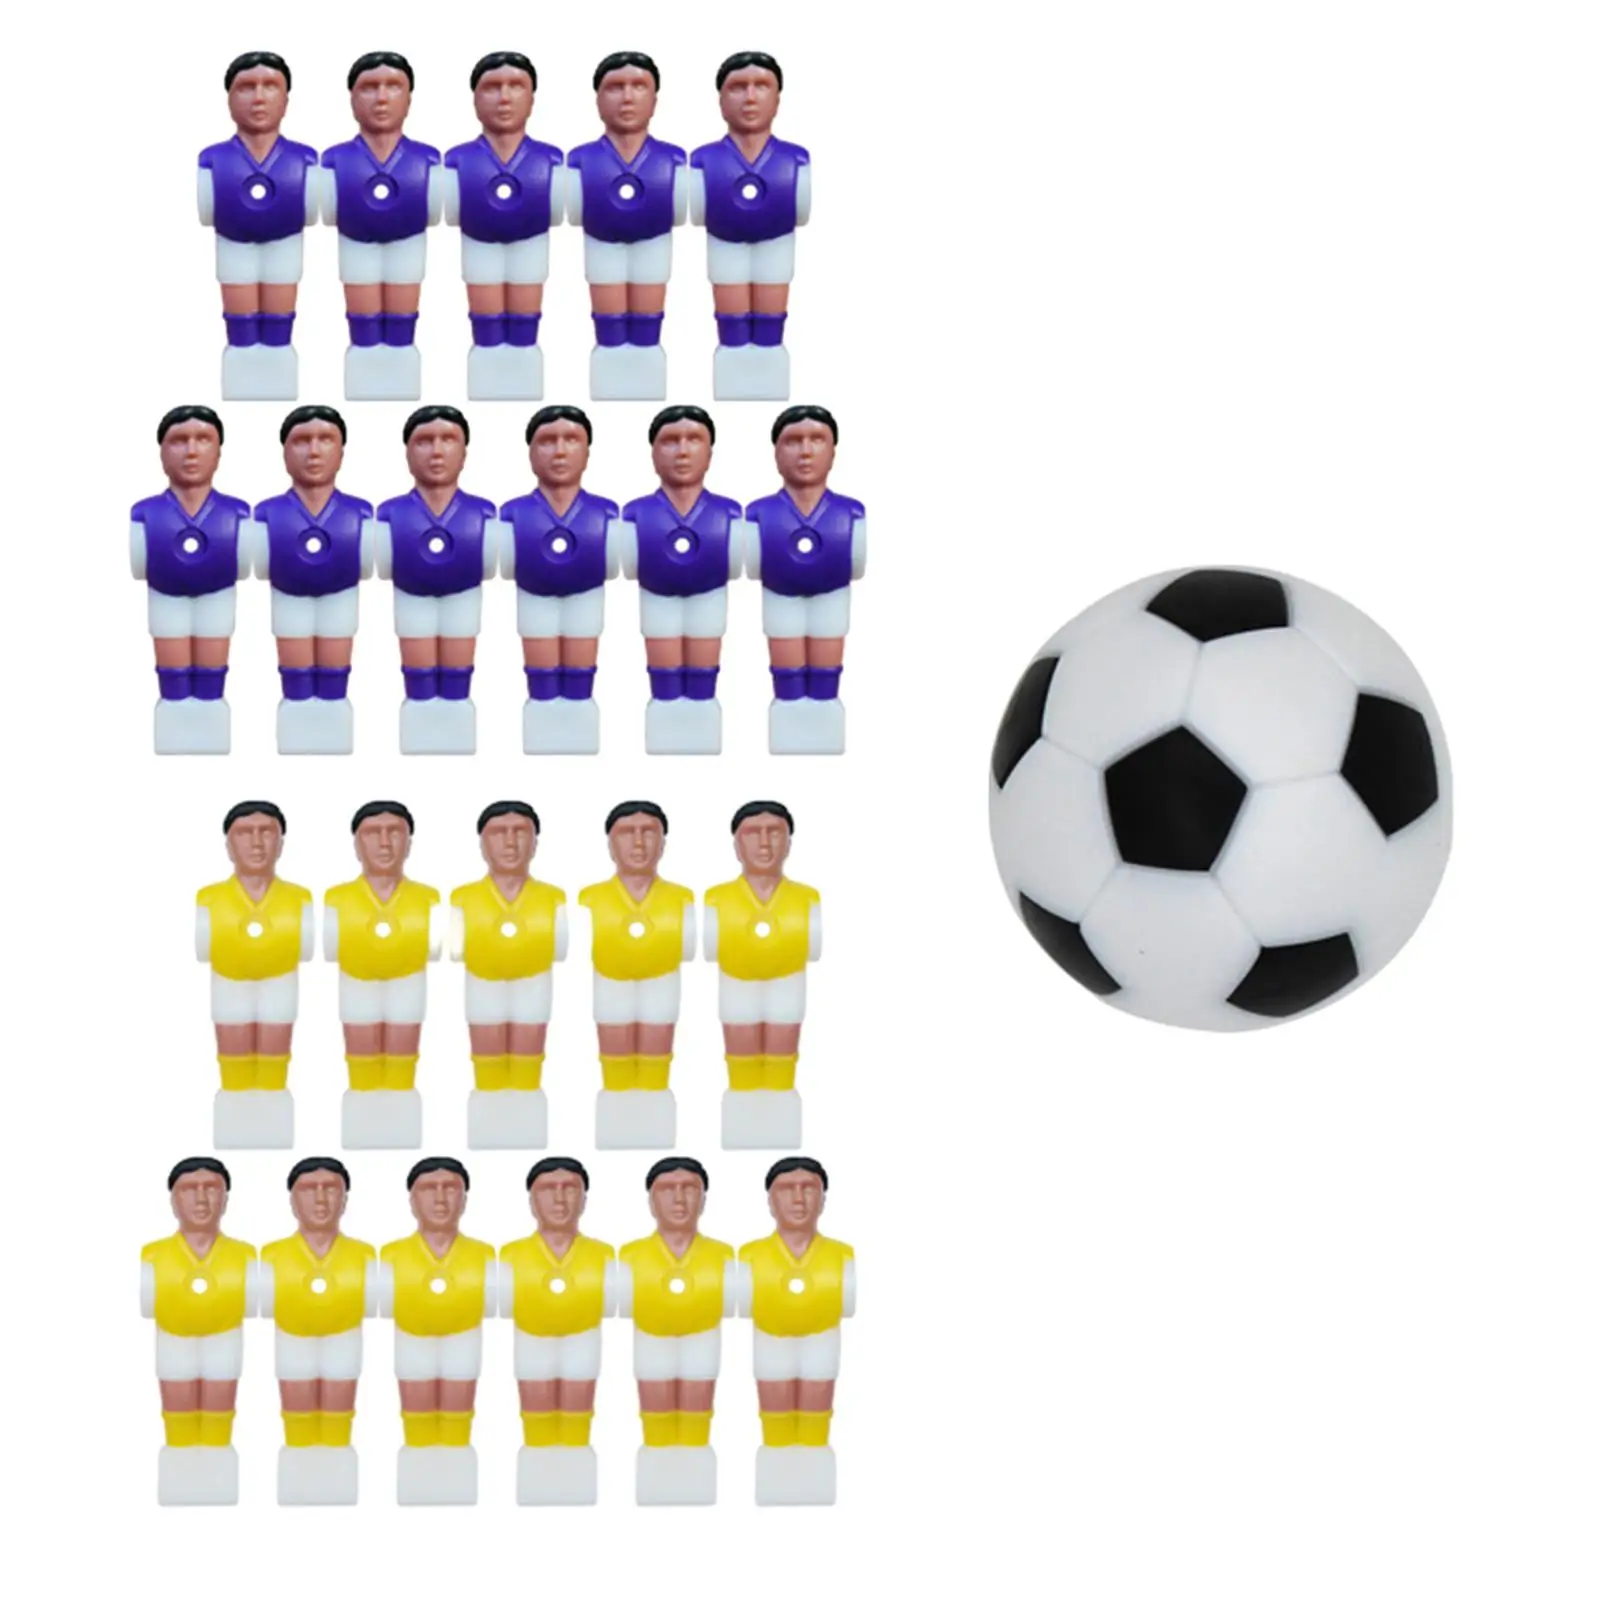 Foosball Men Replacement, Soccer Table Foosball Player, Mini Doll Table Football